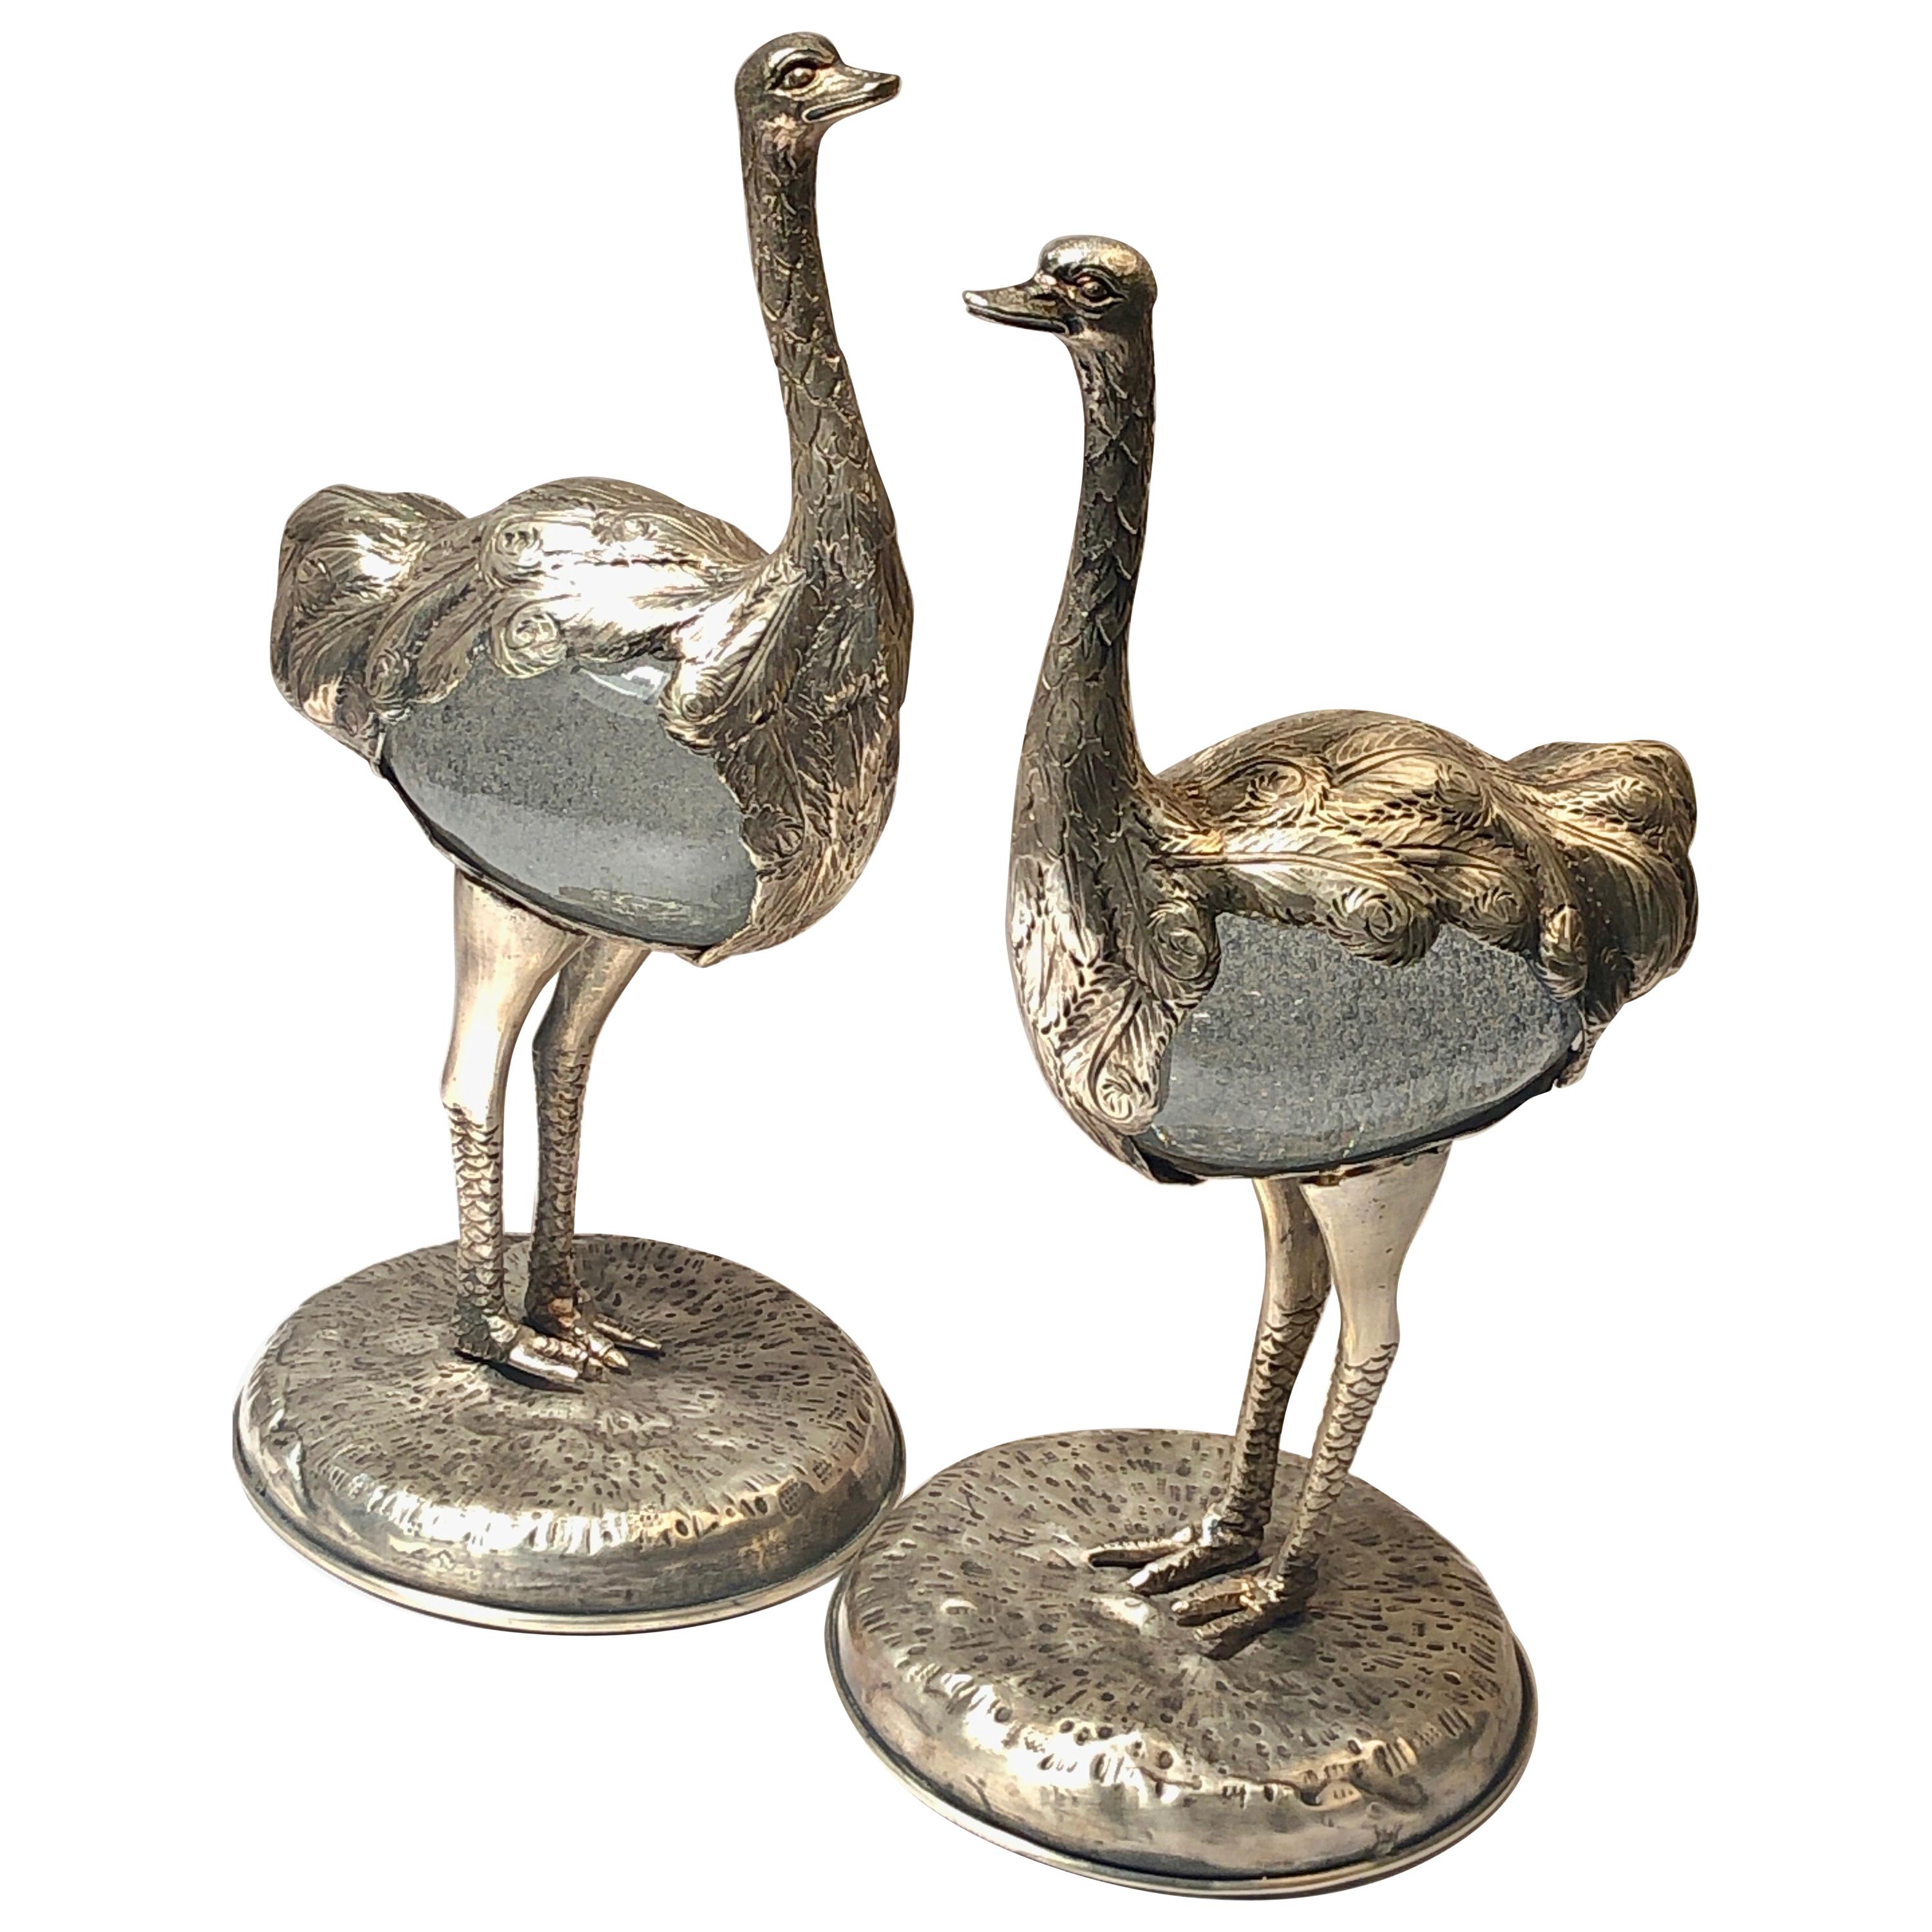 Rare Signed Gabriella Crespi Ostrich Set of Two Sculpture, 1970s, Italy